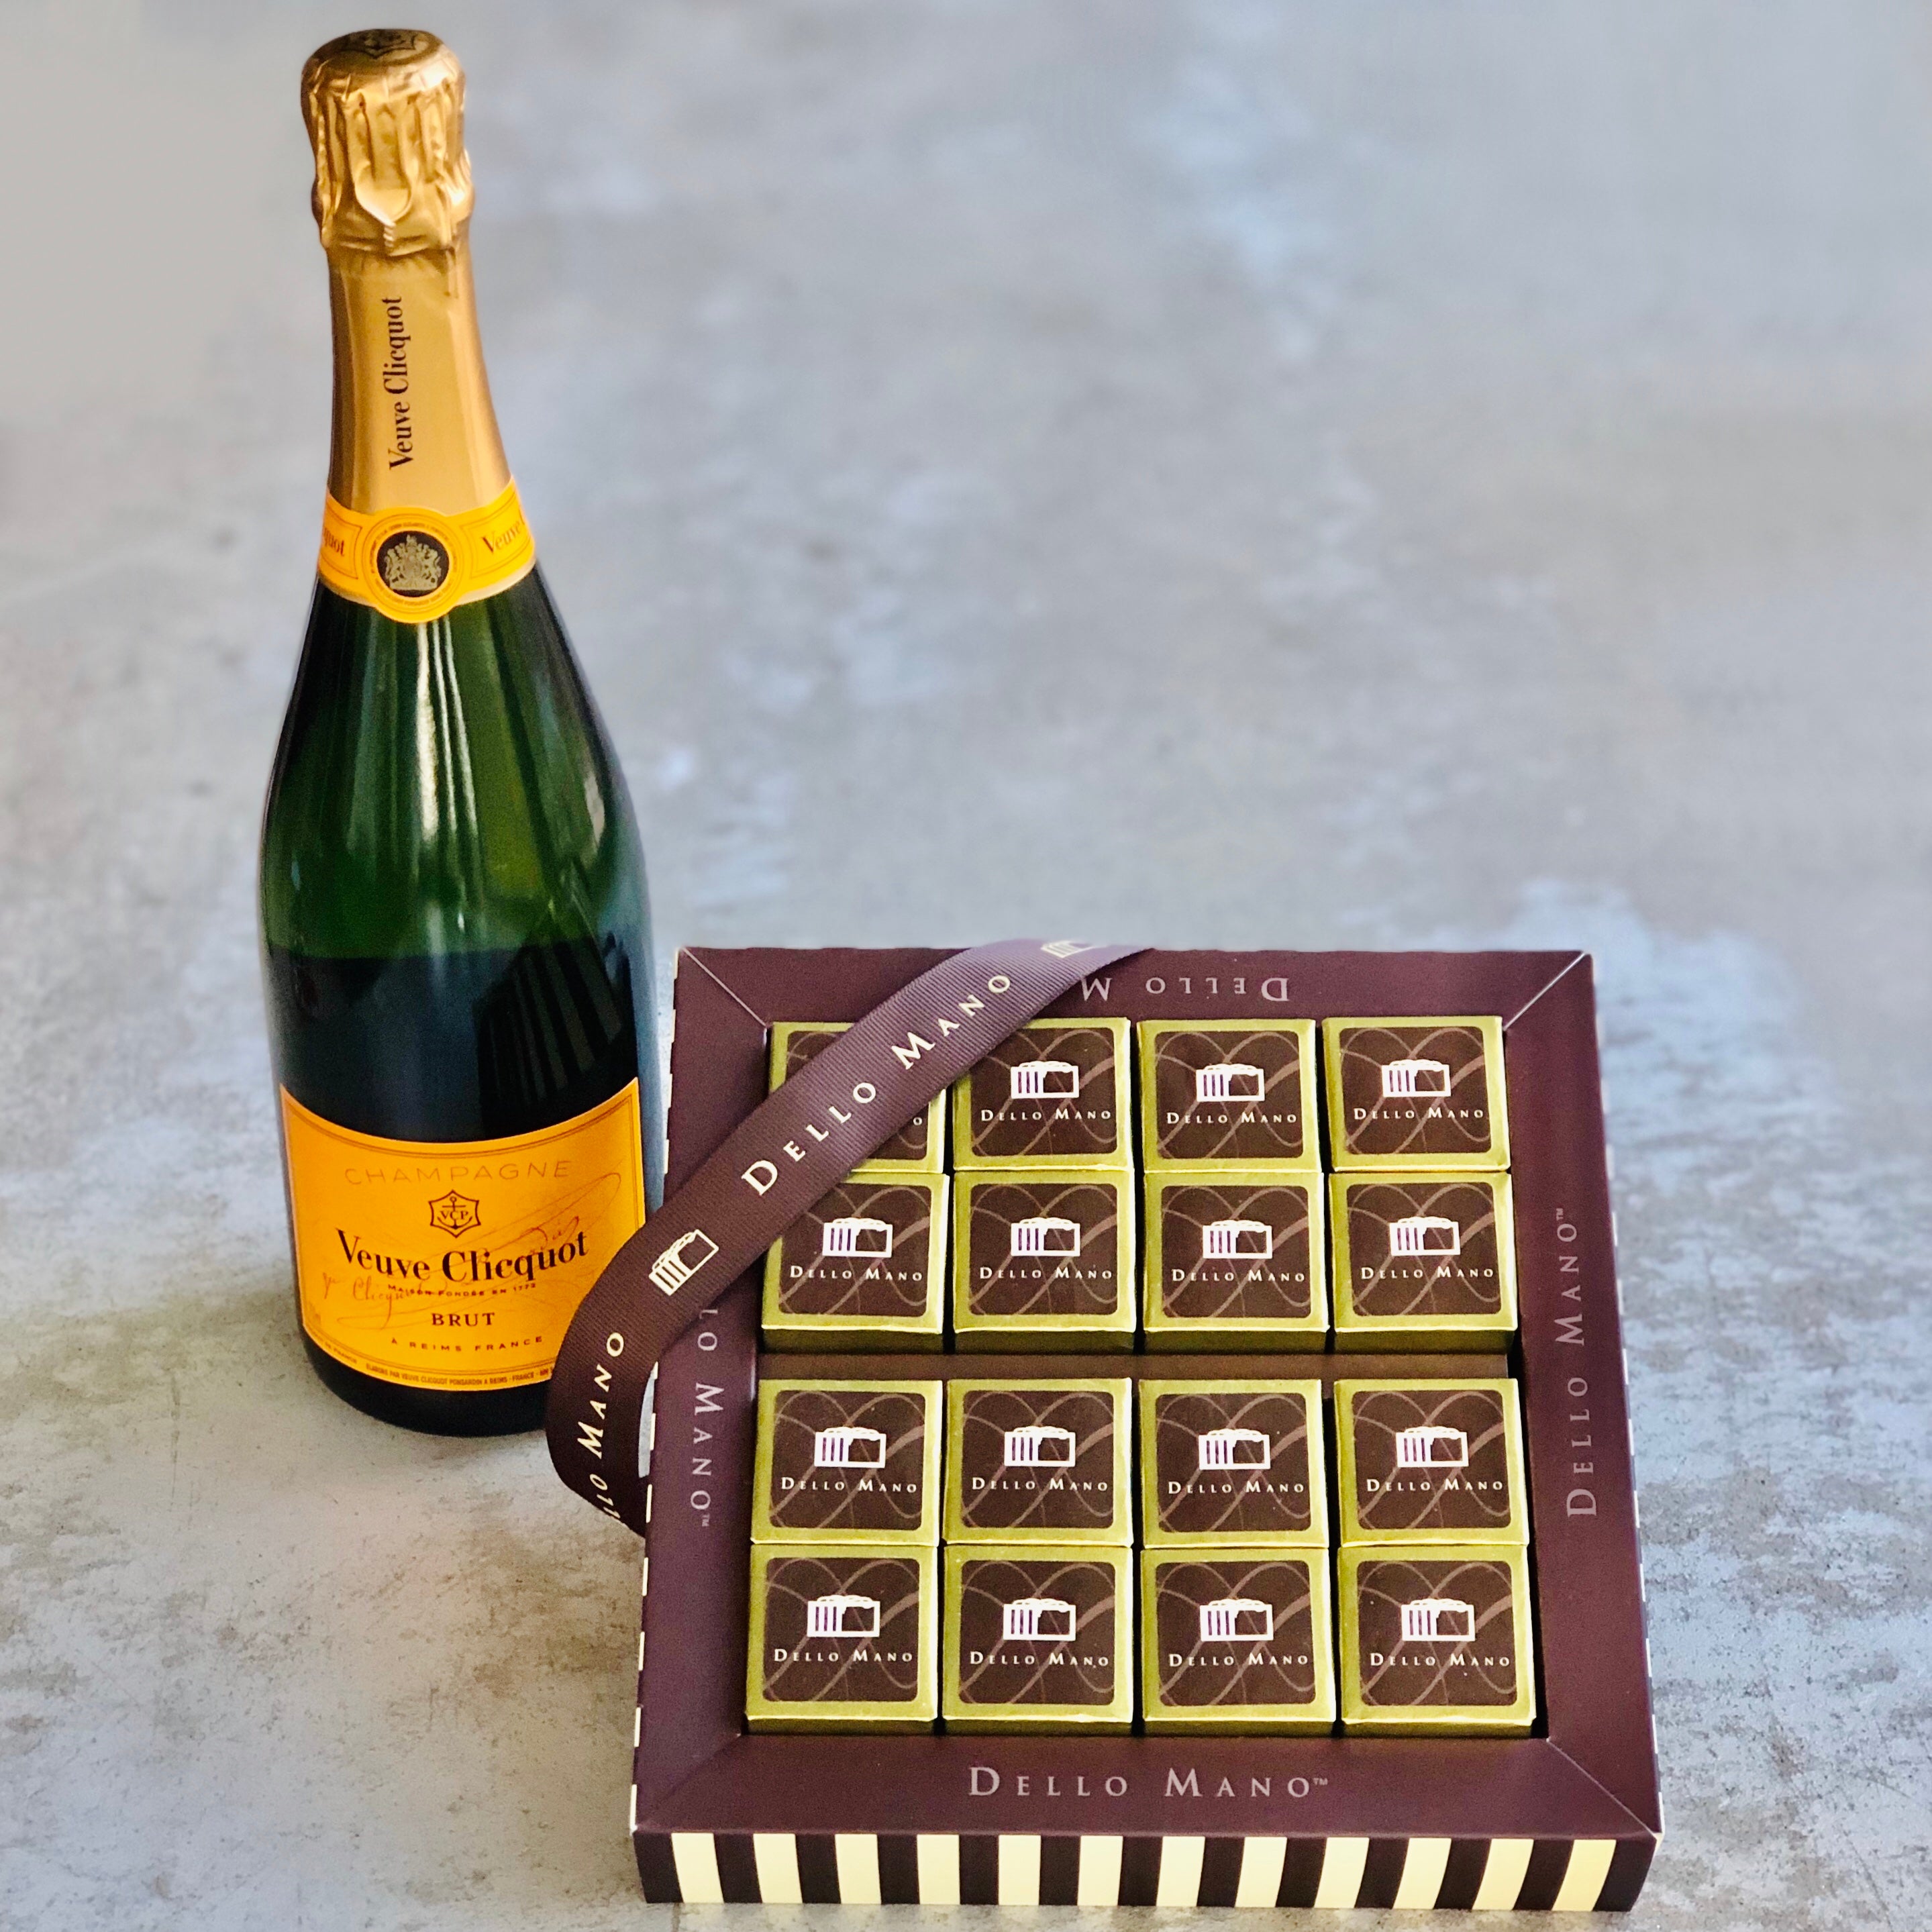 Bottle of bubbles and box of brownies. The champagne is standing up and has a label saying Veuve Cliquot. The gold foiled brownies are in a brown chocolate box with words saying Dello Mano